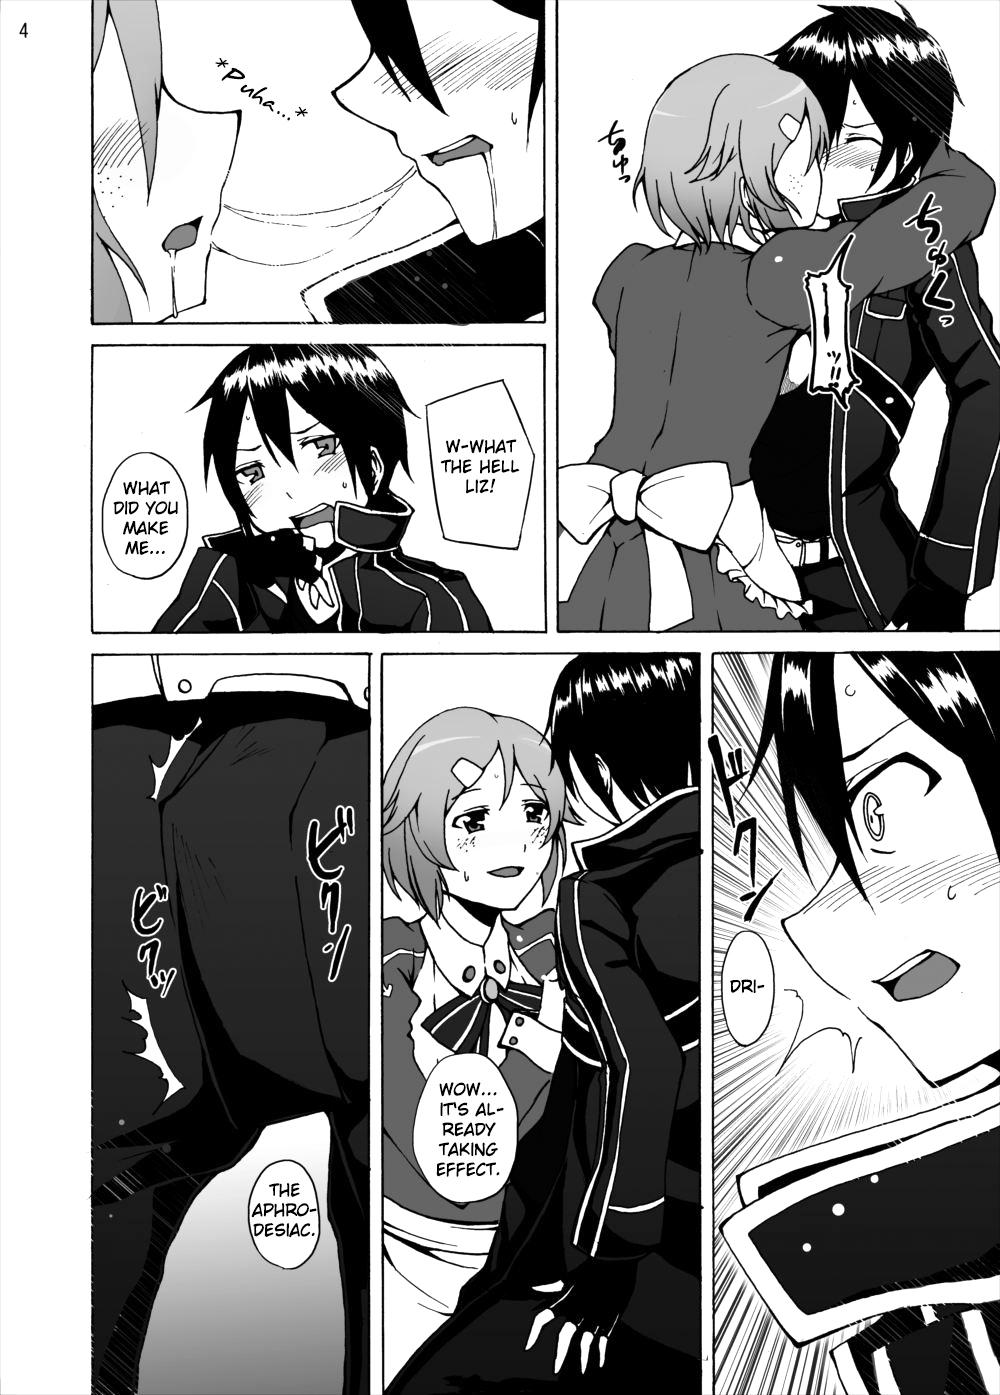 Jeune Mec Lisbeth's Decision...To Steal Kirito From Asuna Even if She Has to Use a Dangerous Drug - Sword art online Interracial Hardcore - Page 4